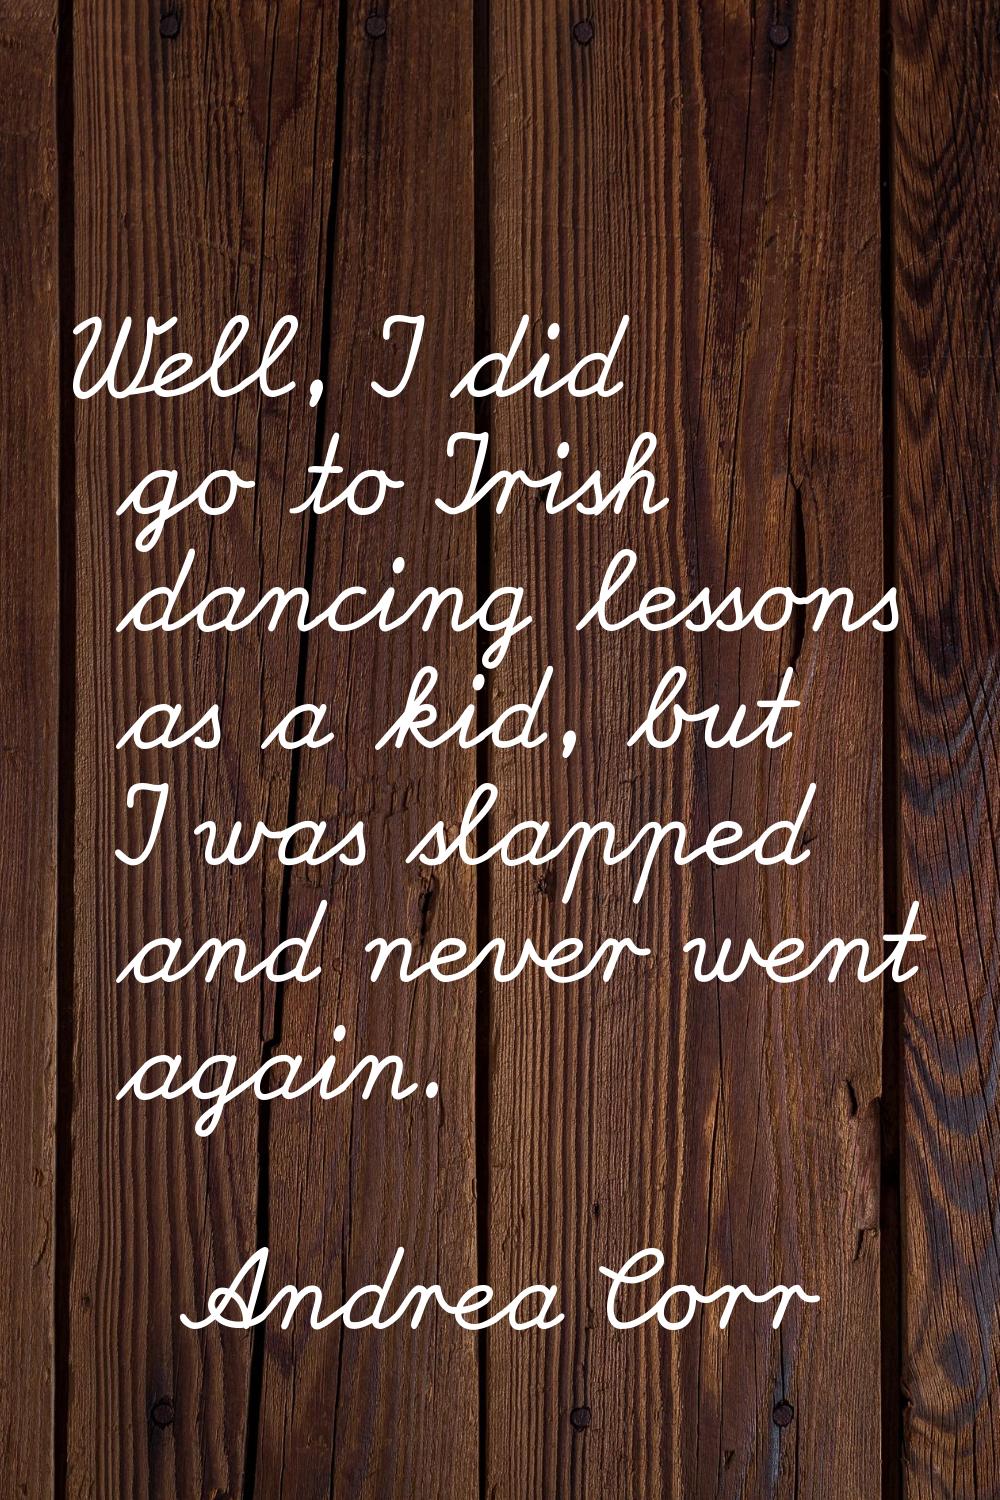 Well, I did go to Irish dancing lessons as a kid, but I was slapped and never went again.